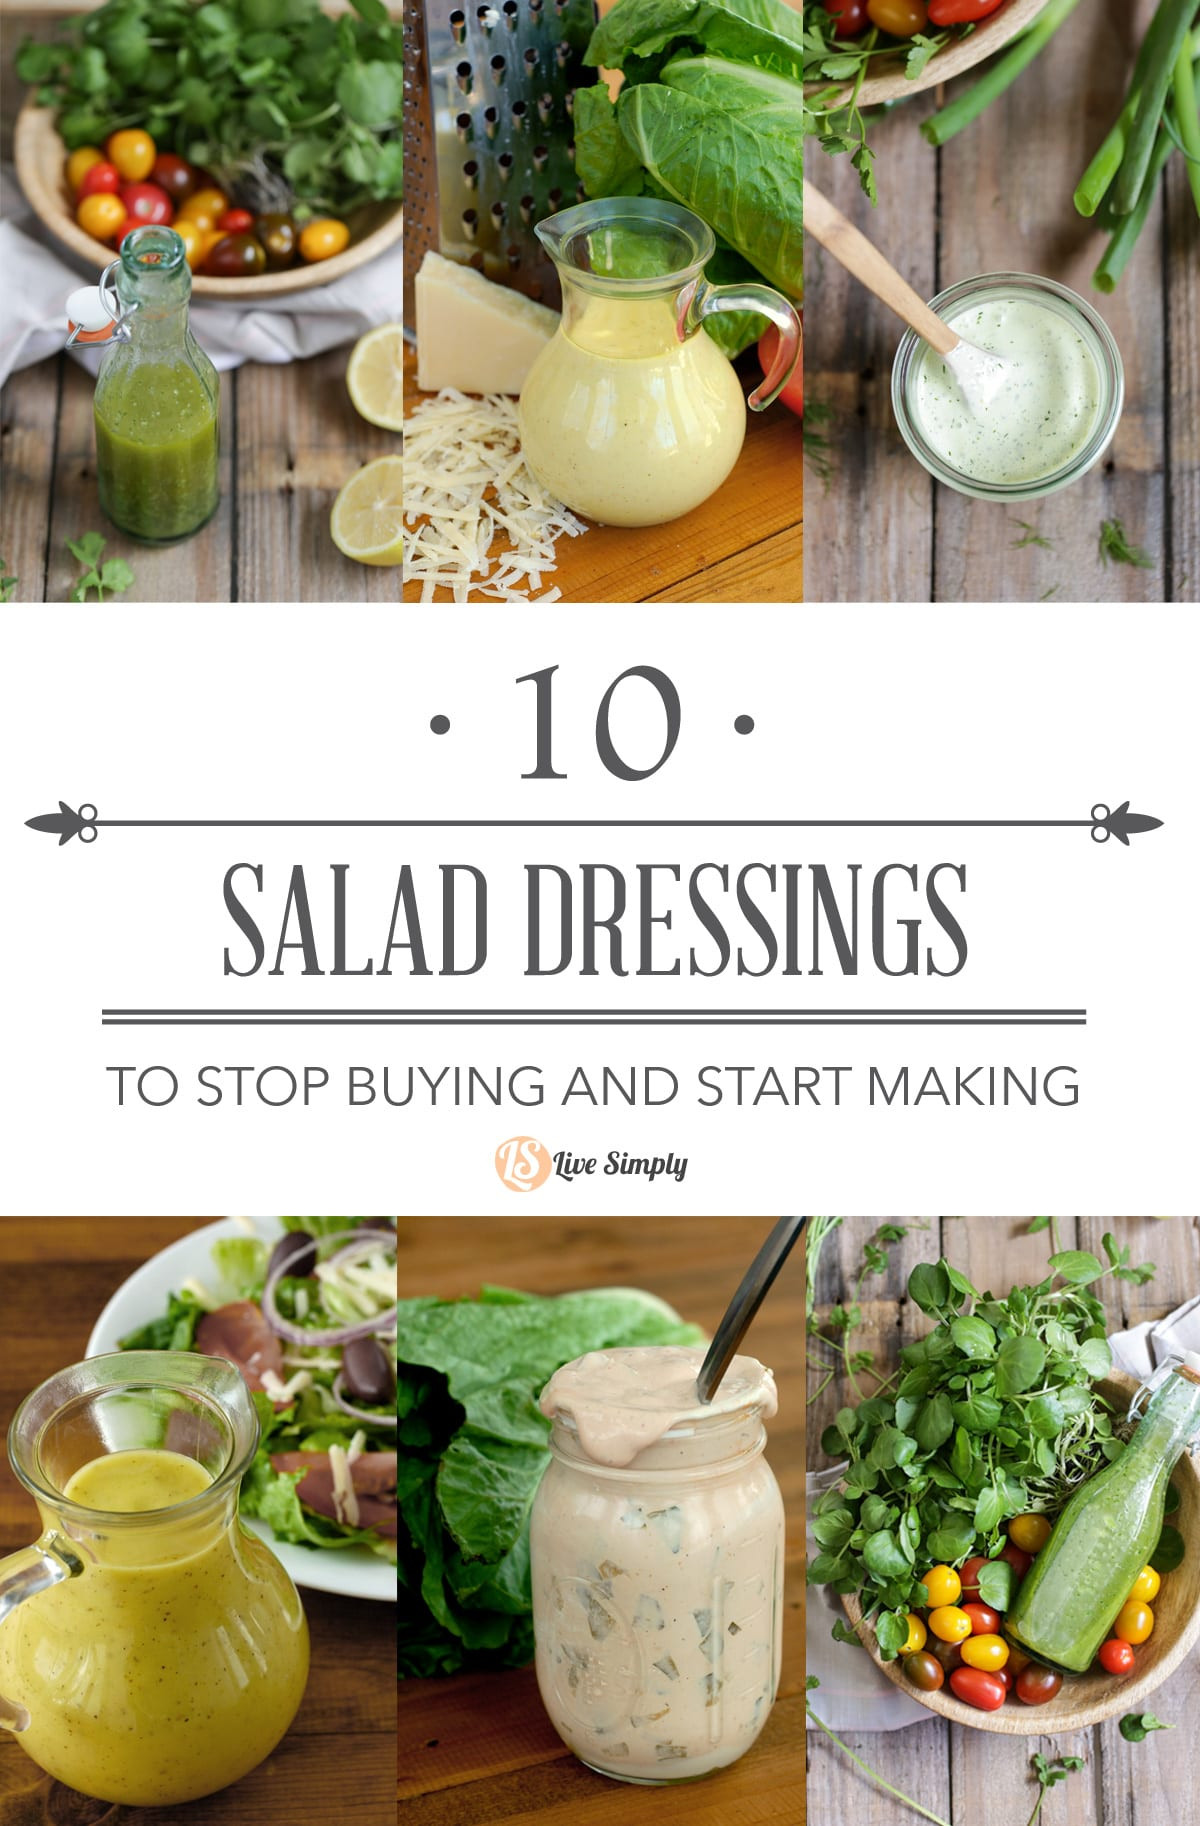 Zaxby'S Salad Dressings
 9 Frozen Treats to Stop Buying and Start Making Live Simply